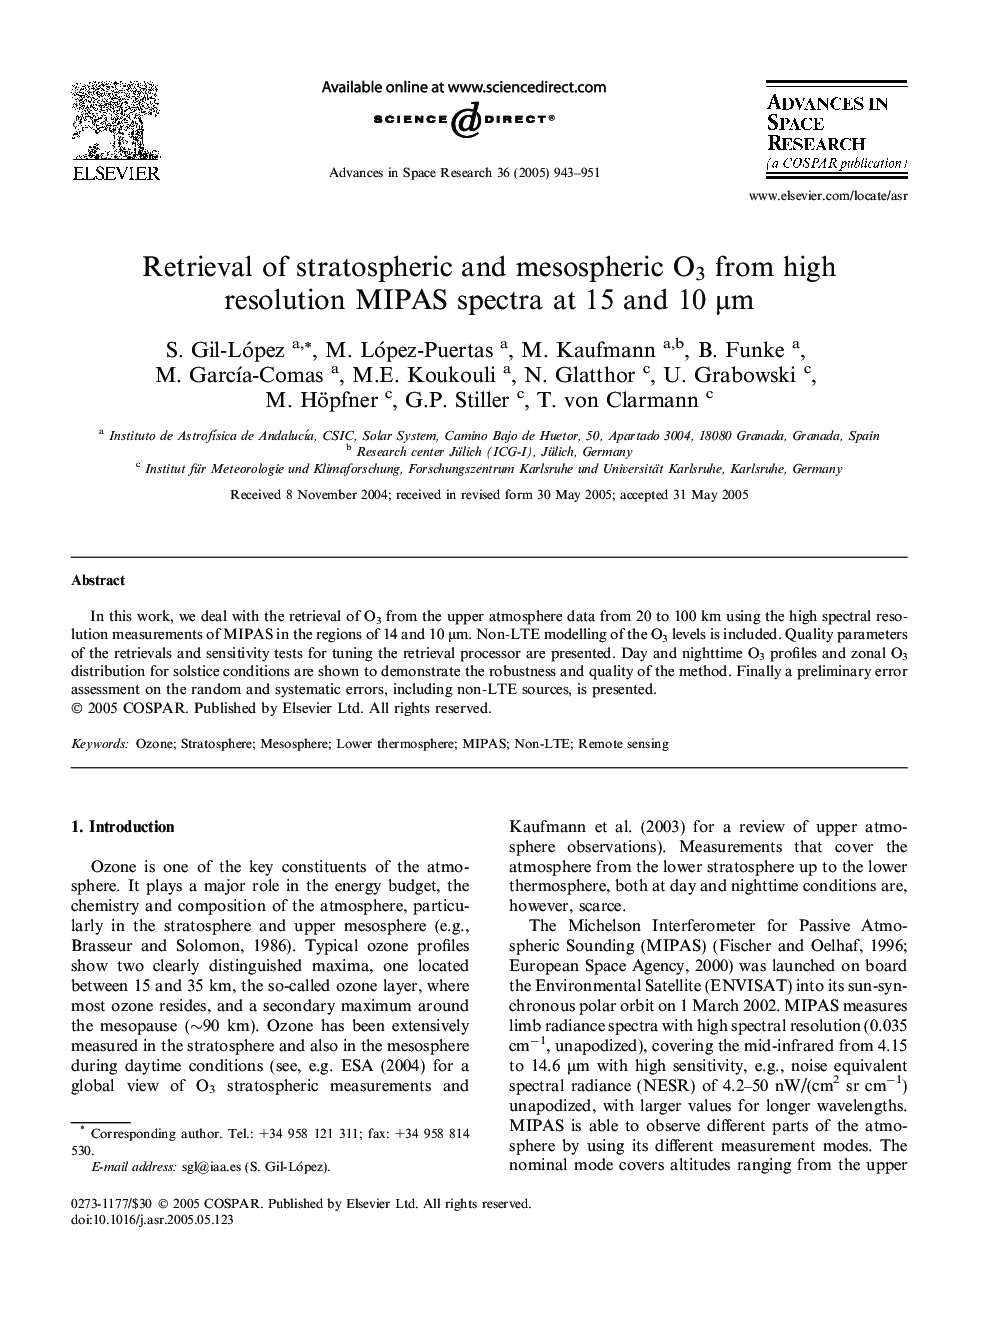 Retrieval of stratospheric and mesospheric O3 from high resolution MIPAS spectra at 15 and 10 Î¼m